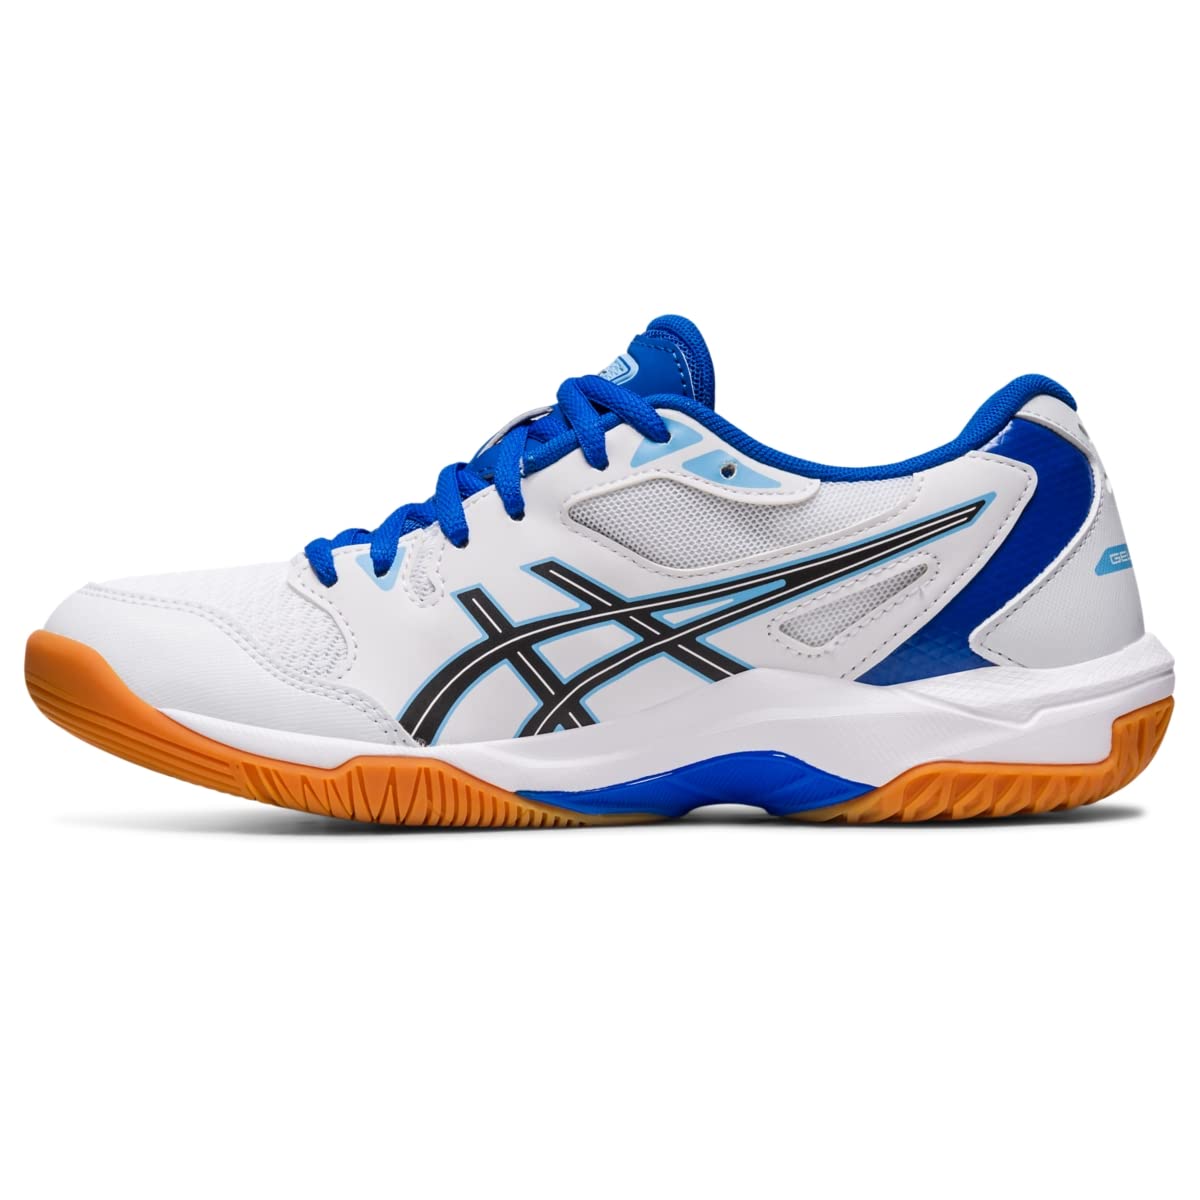 Asics Womens Gel-Rocket 10 Volleyball Shoes, 105, Whitearctic Blue